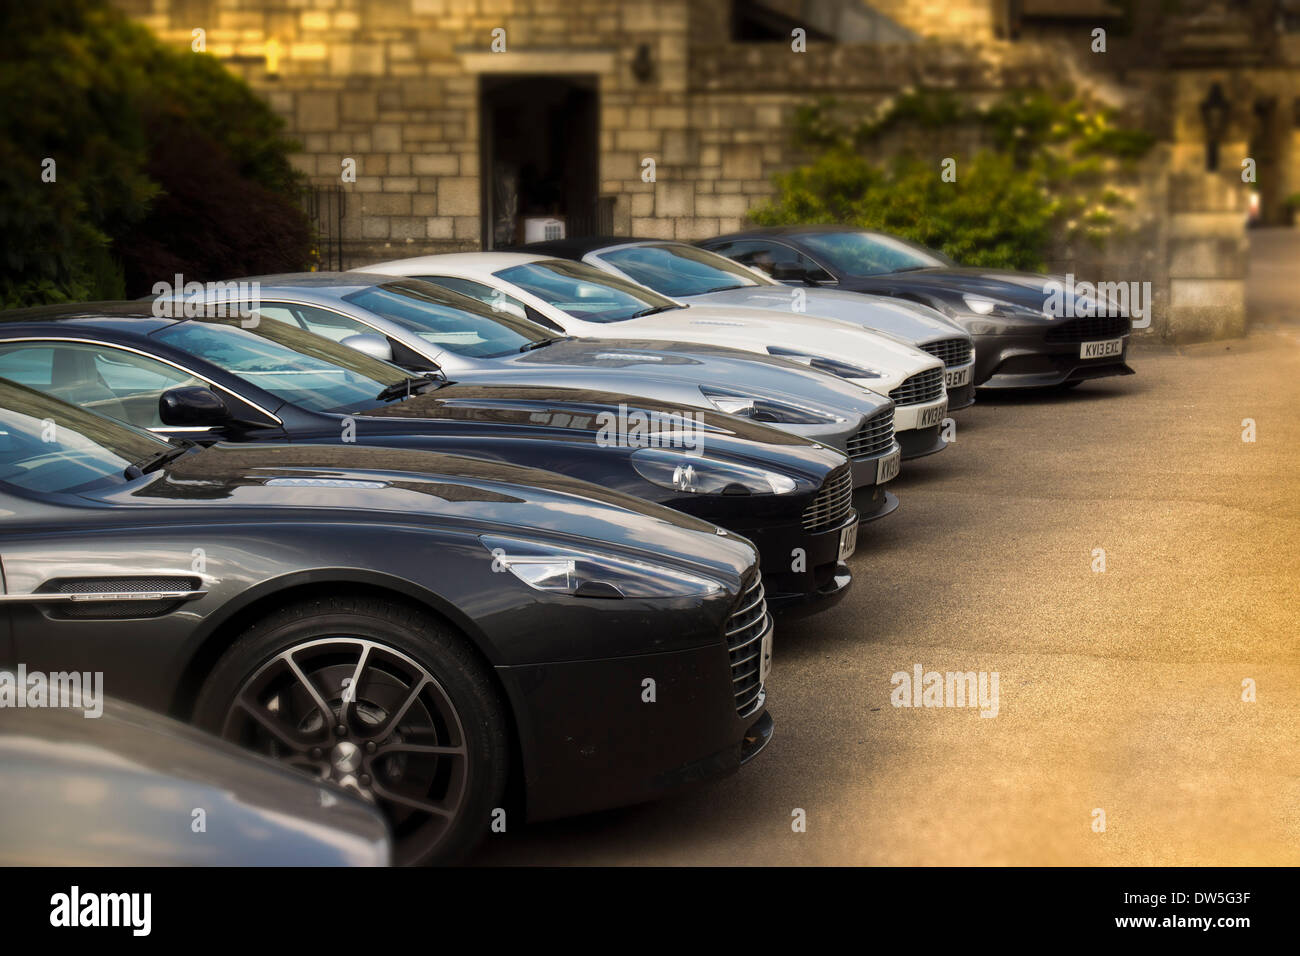 Aston Martins parked in front of a luxury hotel, Cliveden House, Berkshire, United Kingdom, Europe Stock Photo